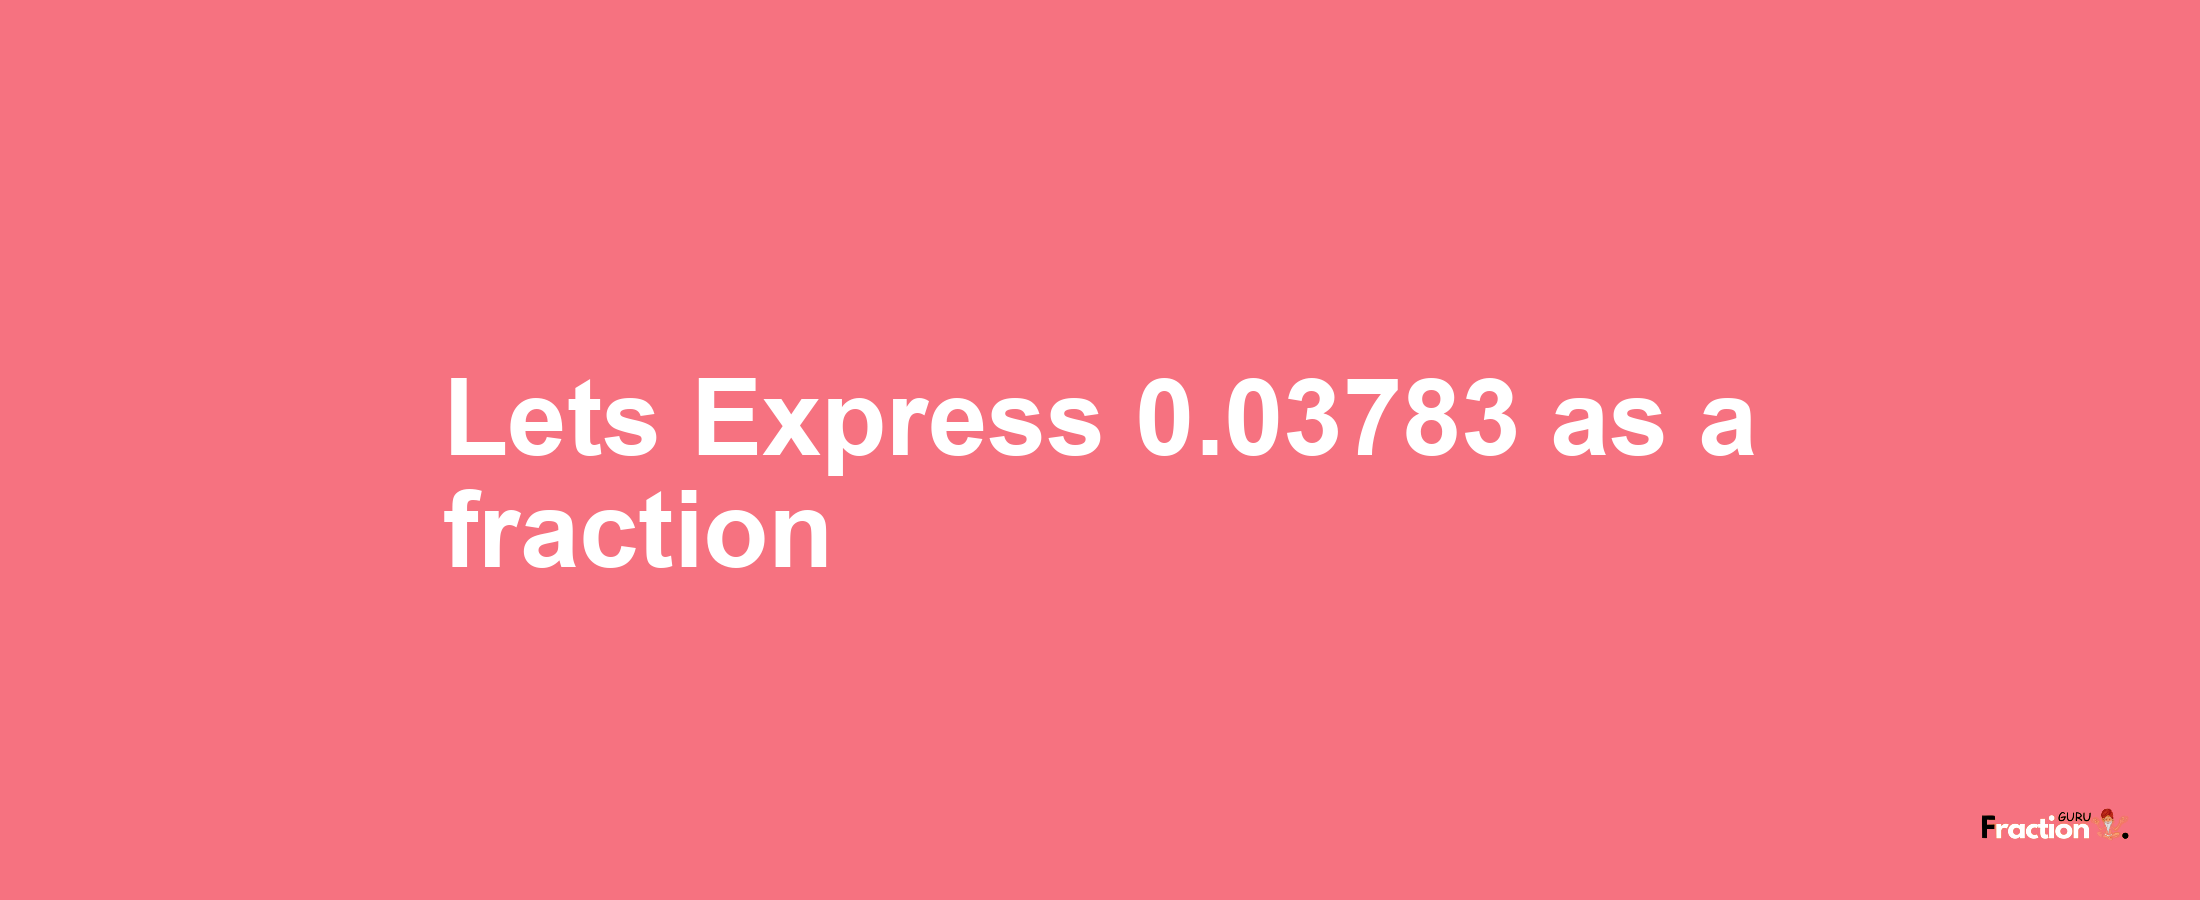 Lets Express 0.03783 as afraction